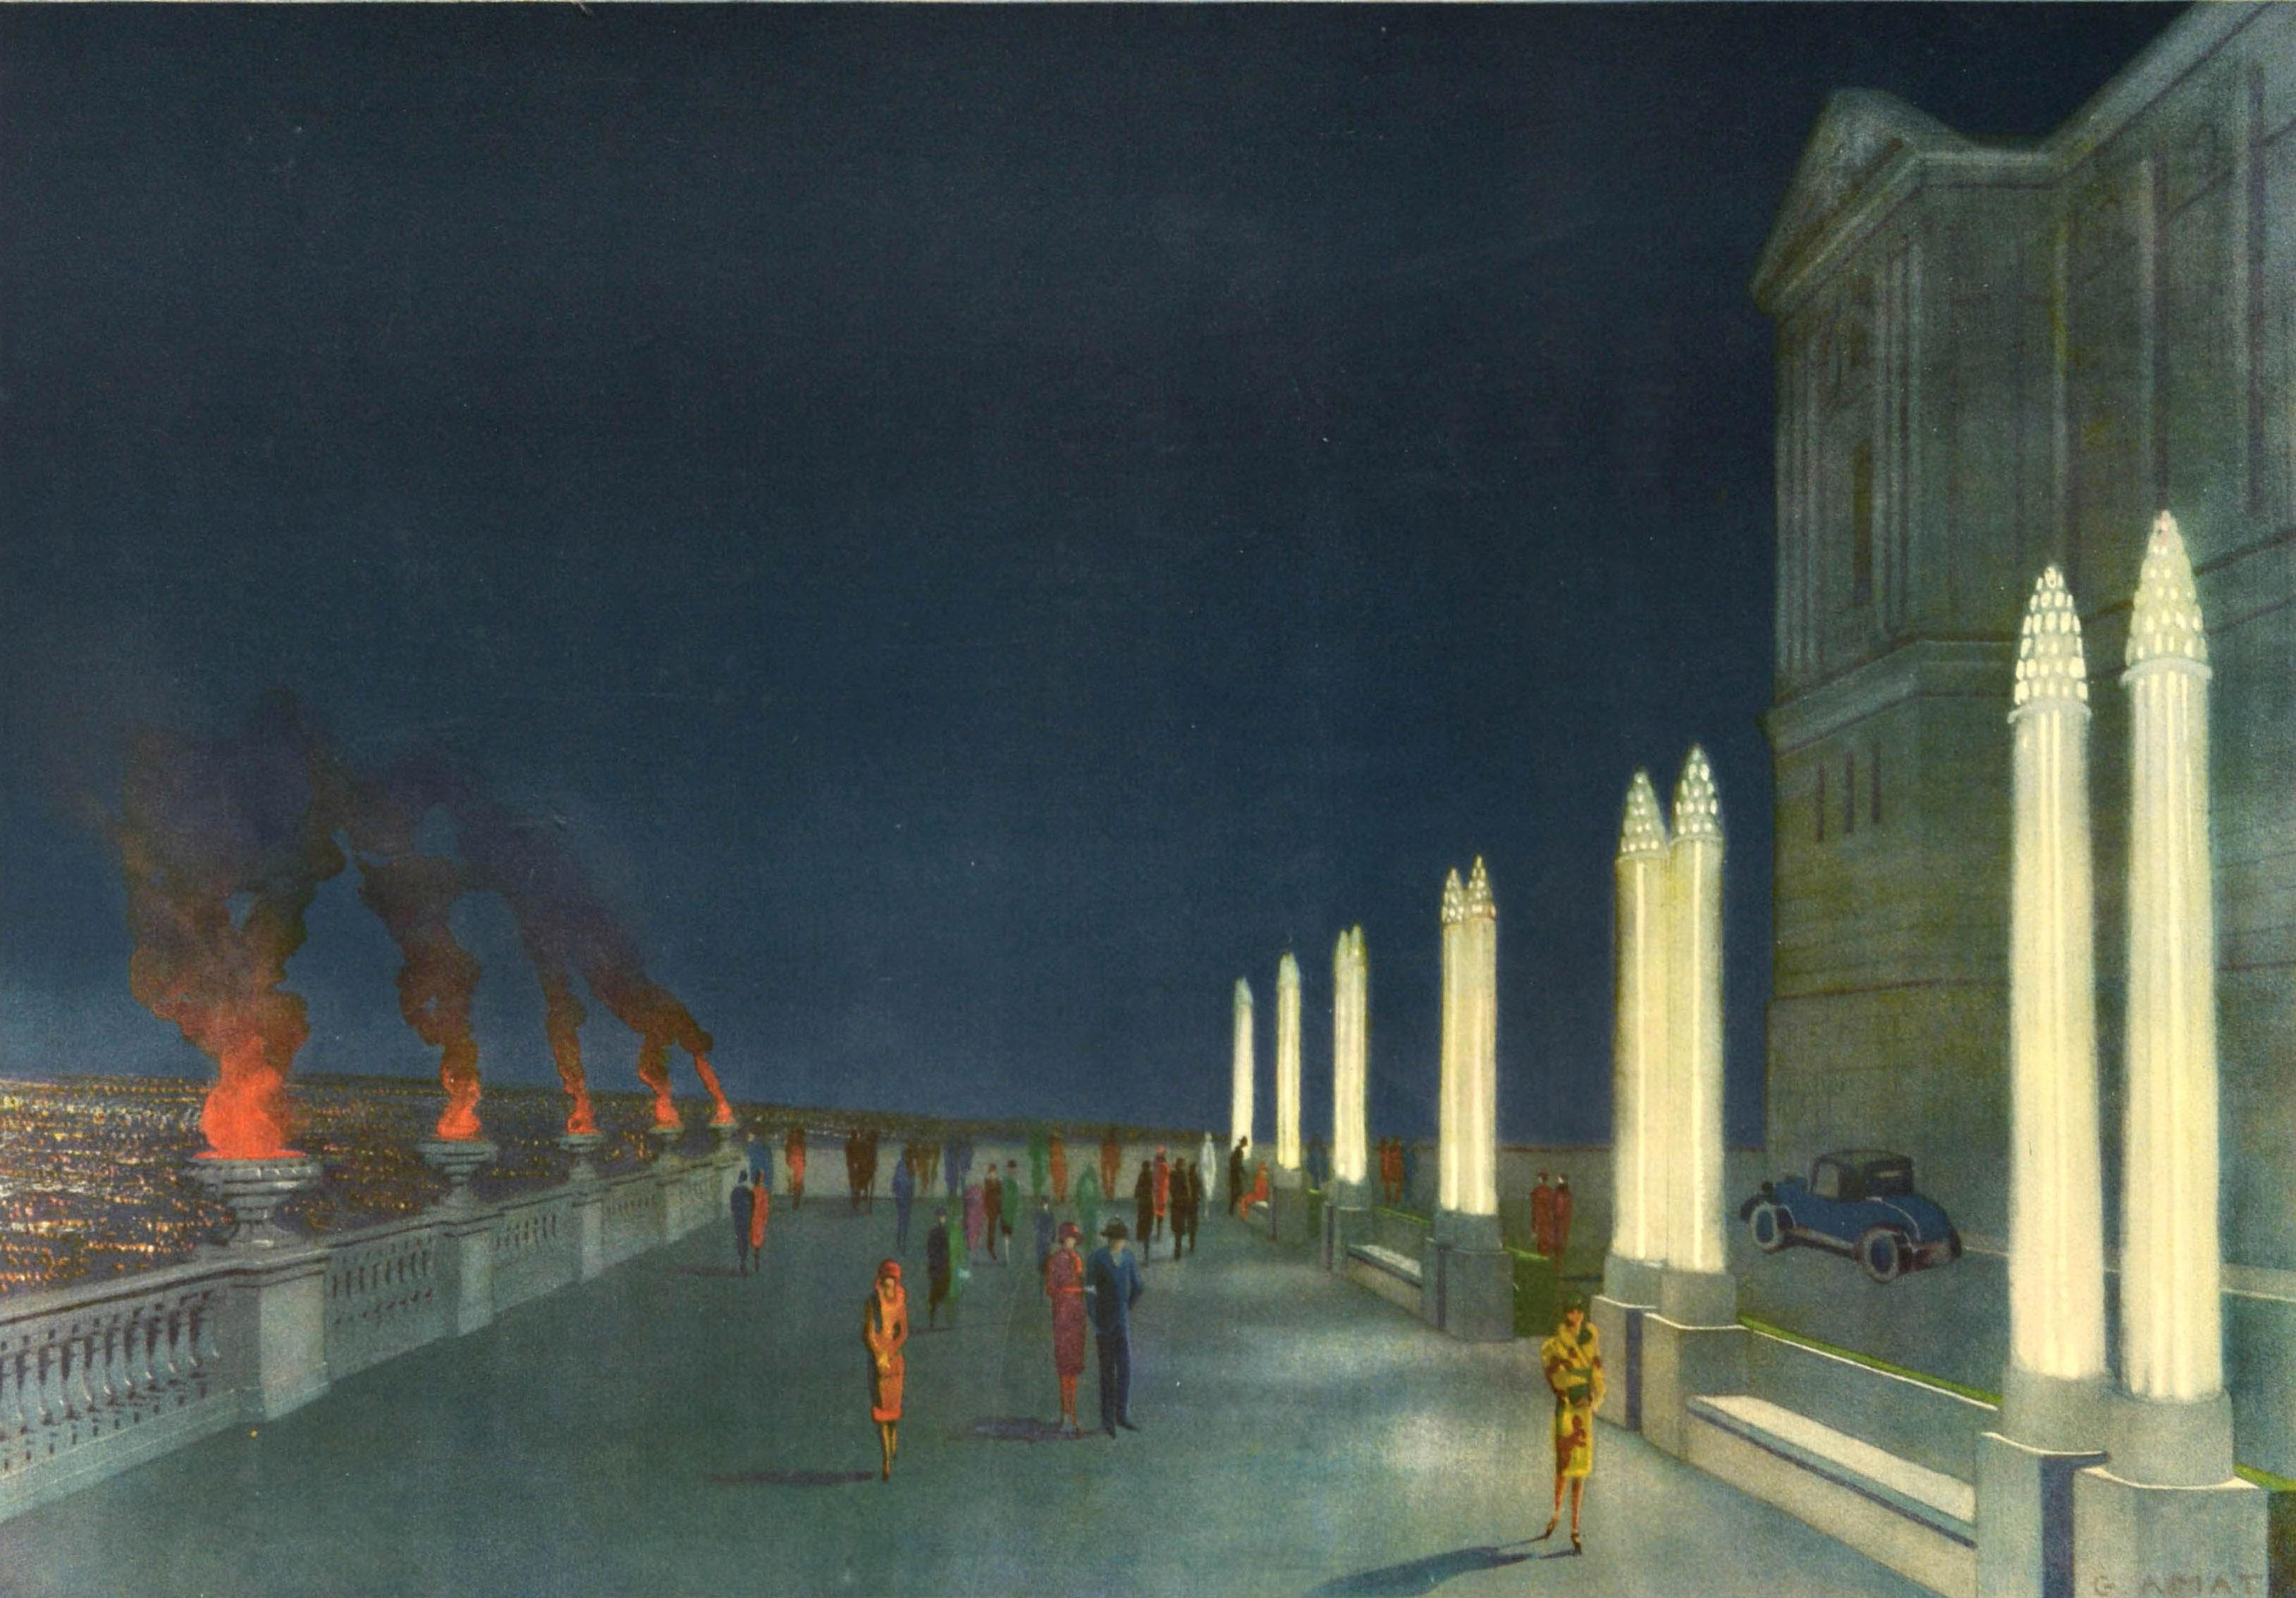 Original vintage advertising poster for the Exposicion Internacional Barcelona International Exposition held from 20 May 1929 to 15 January 1930 featuring an Art Deco illustration of people walking in front of the glass columns lit by electricity